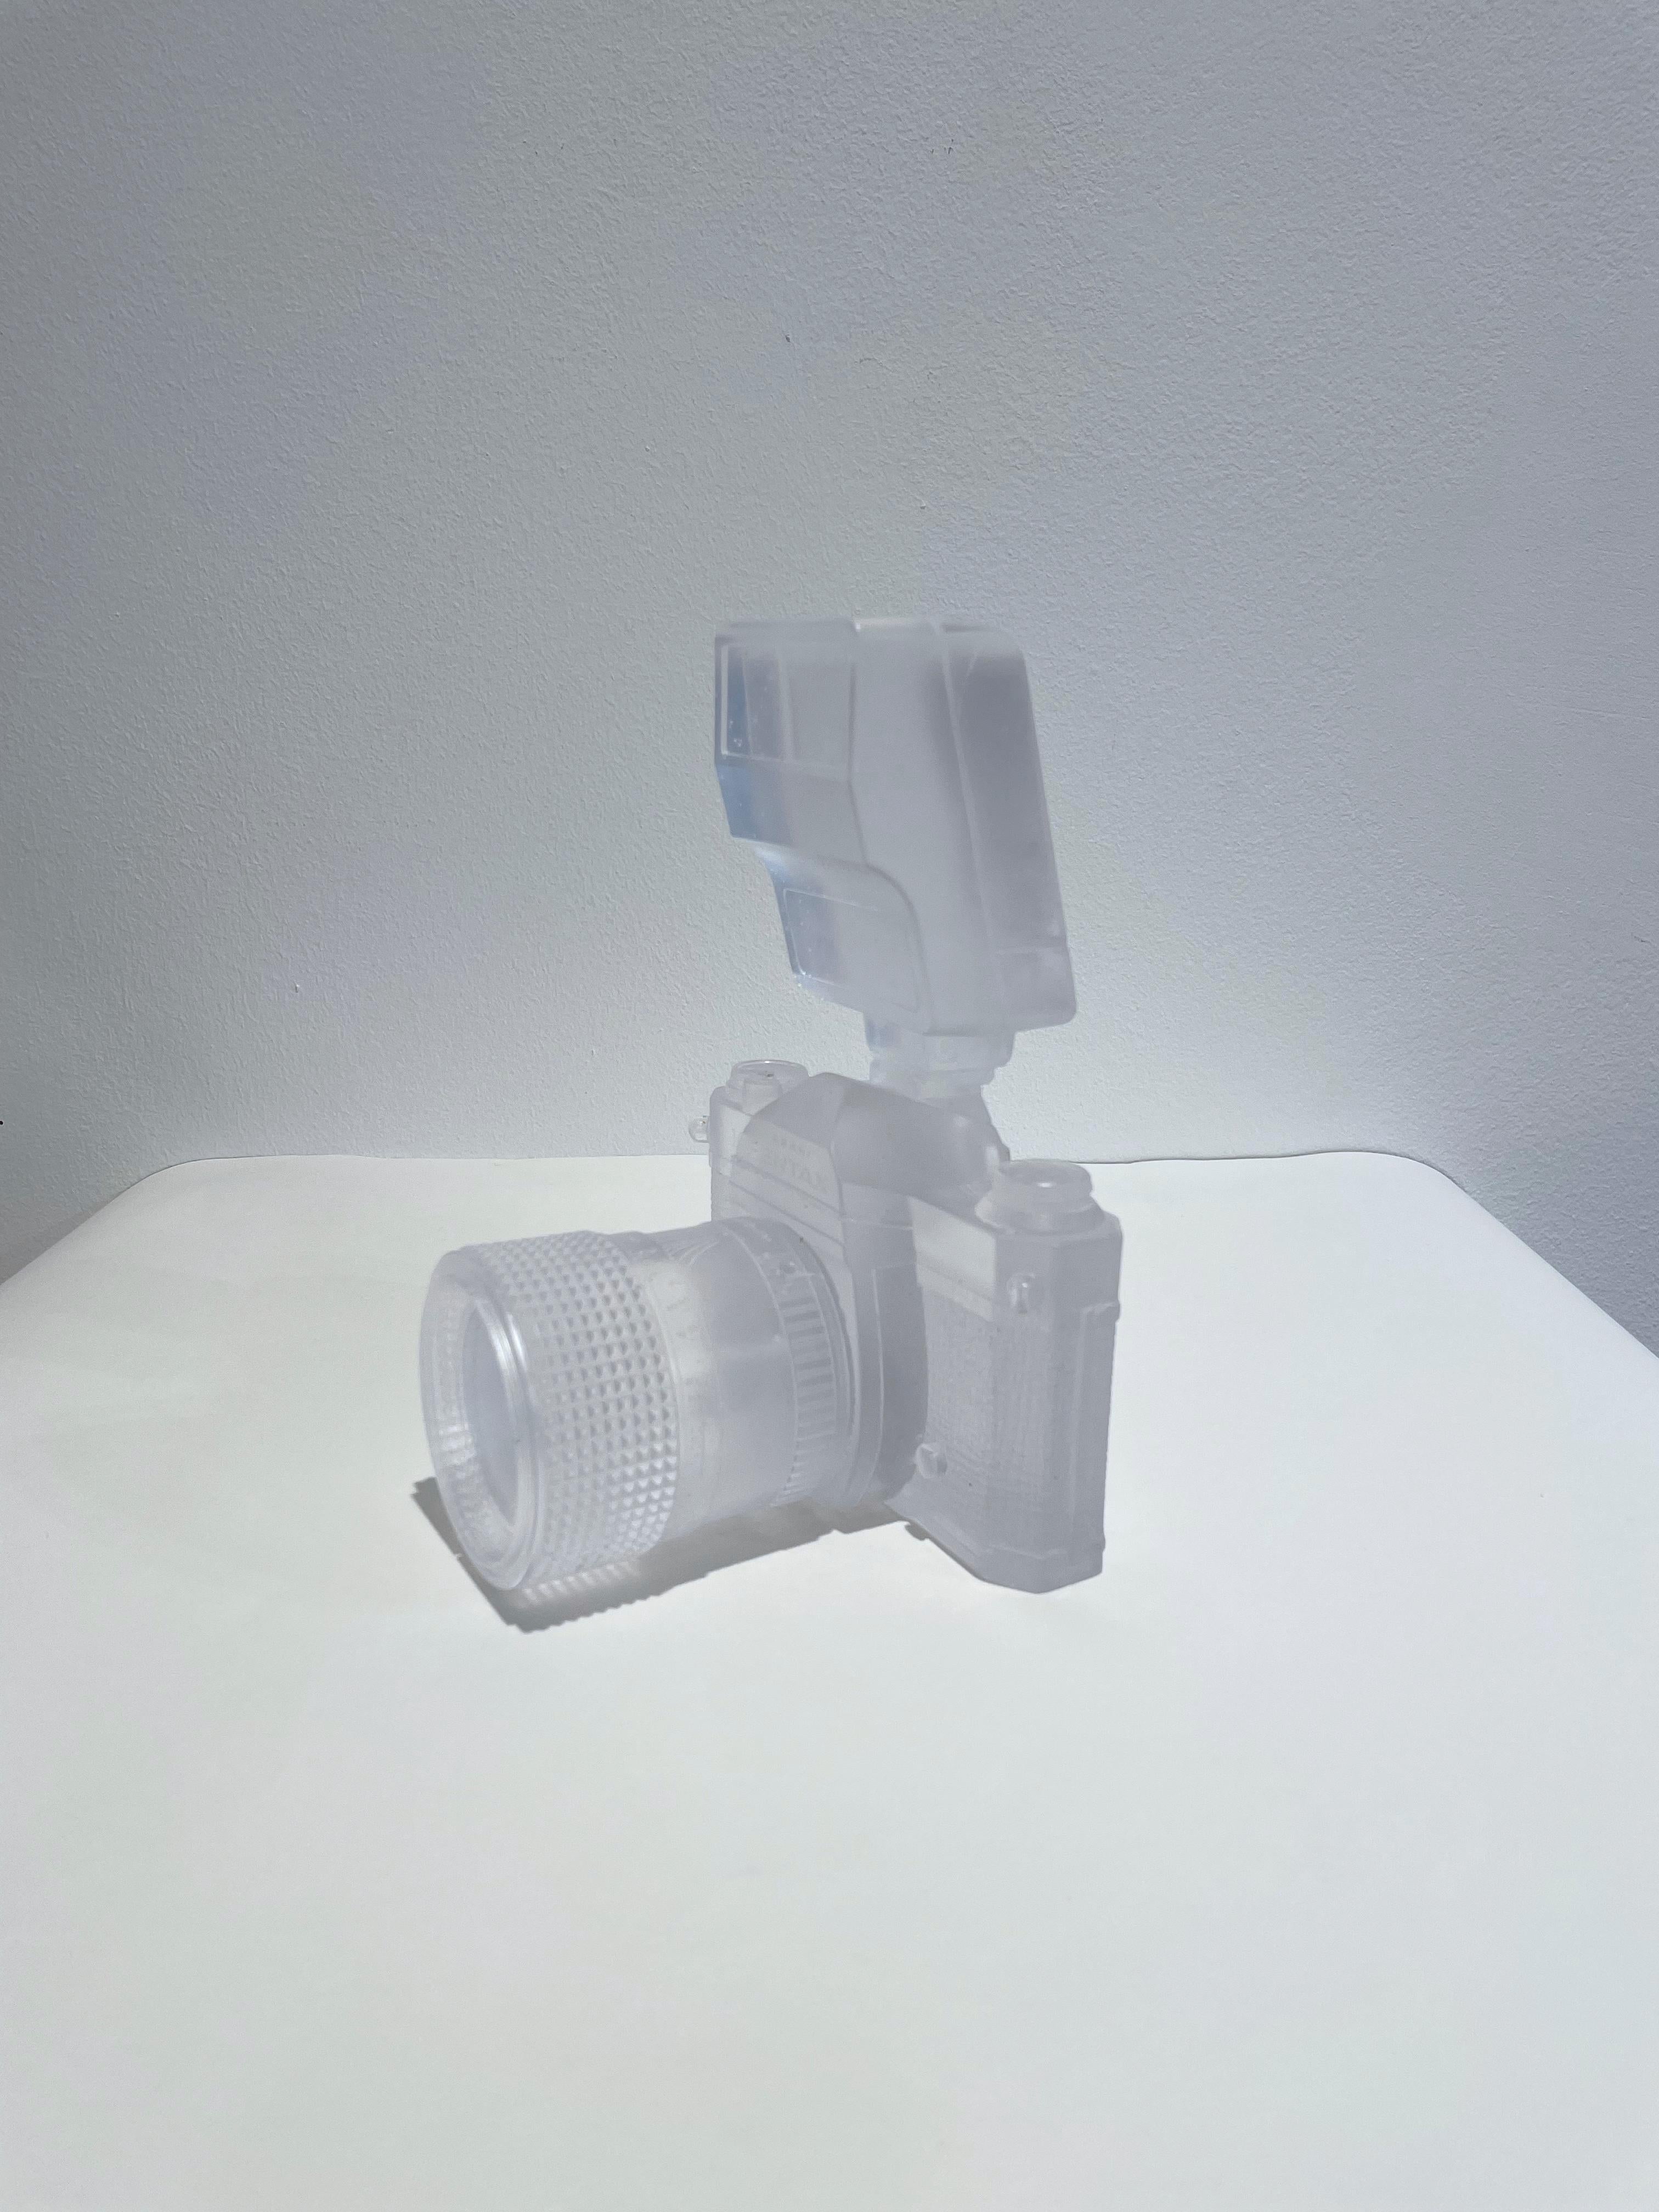 Crystal Relic 003 - Camera - Contemporary Sculpture by Daniel Arsham